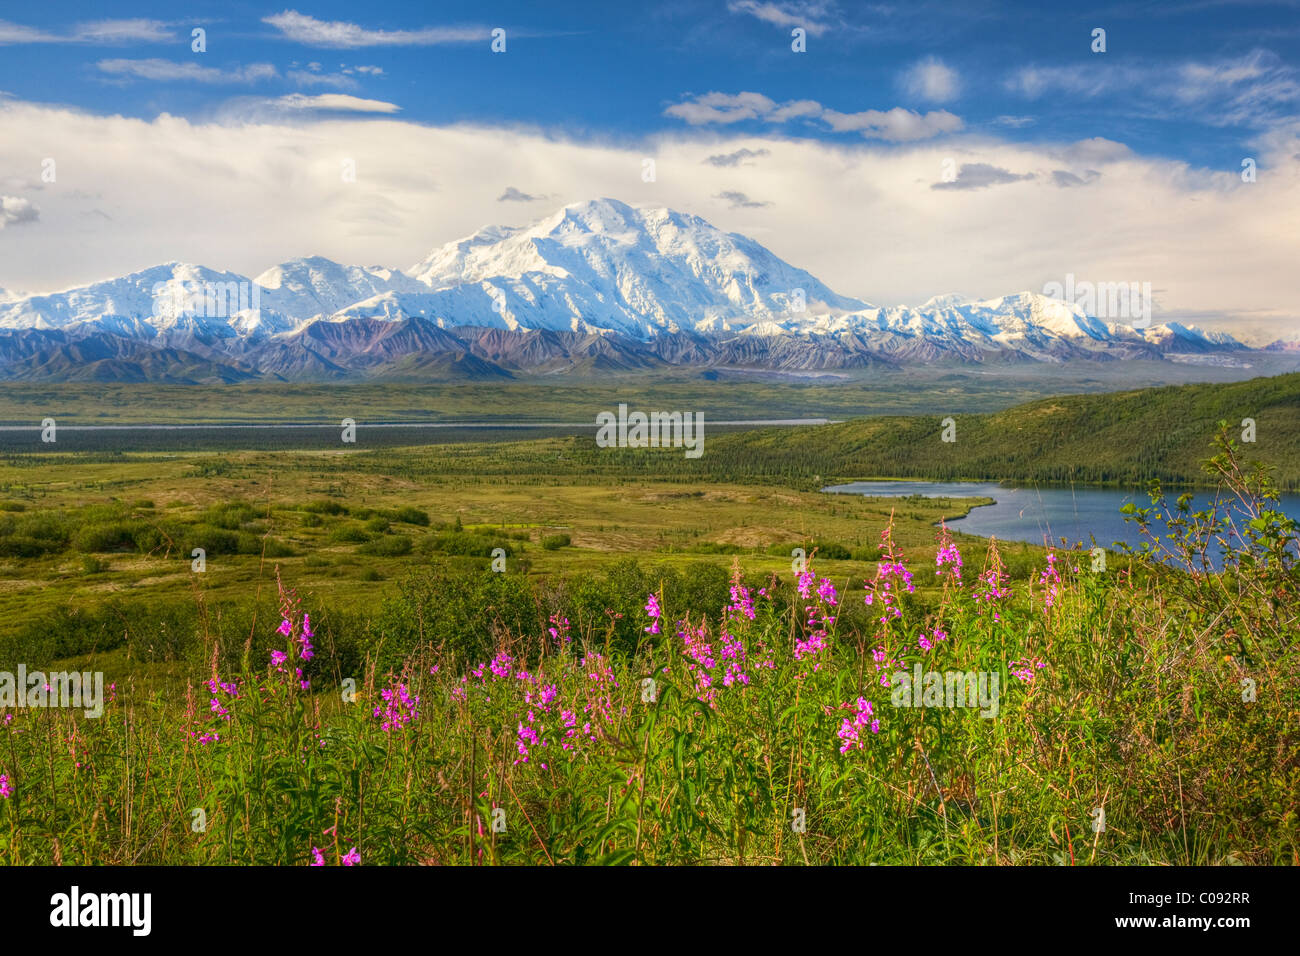 View of Mt. McKinley on a sunny day with McKinley River and Wonder lake in the foreground, Denali National Park, HDR Stock Photo